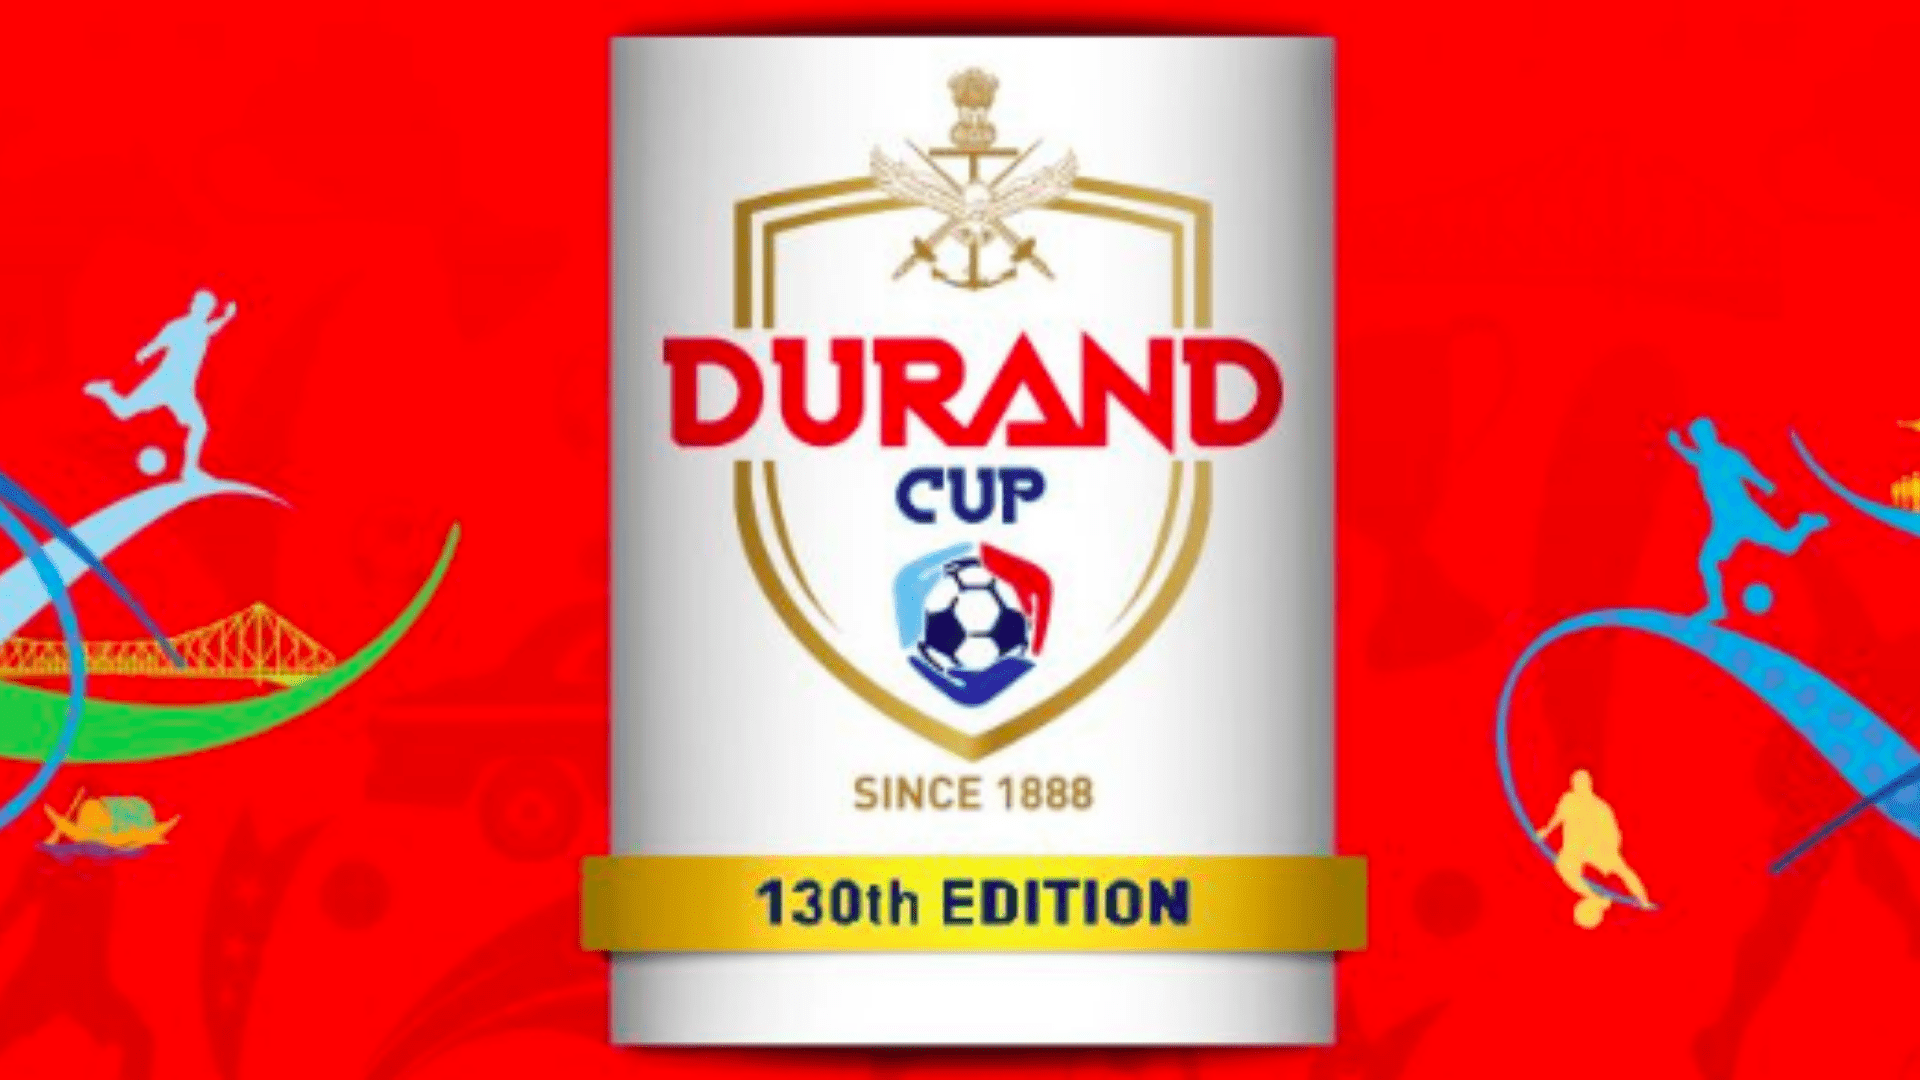 130th edition of Durand Cup